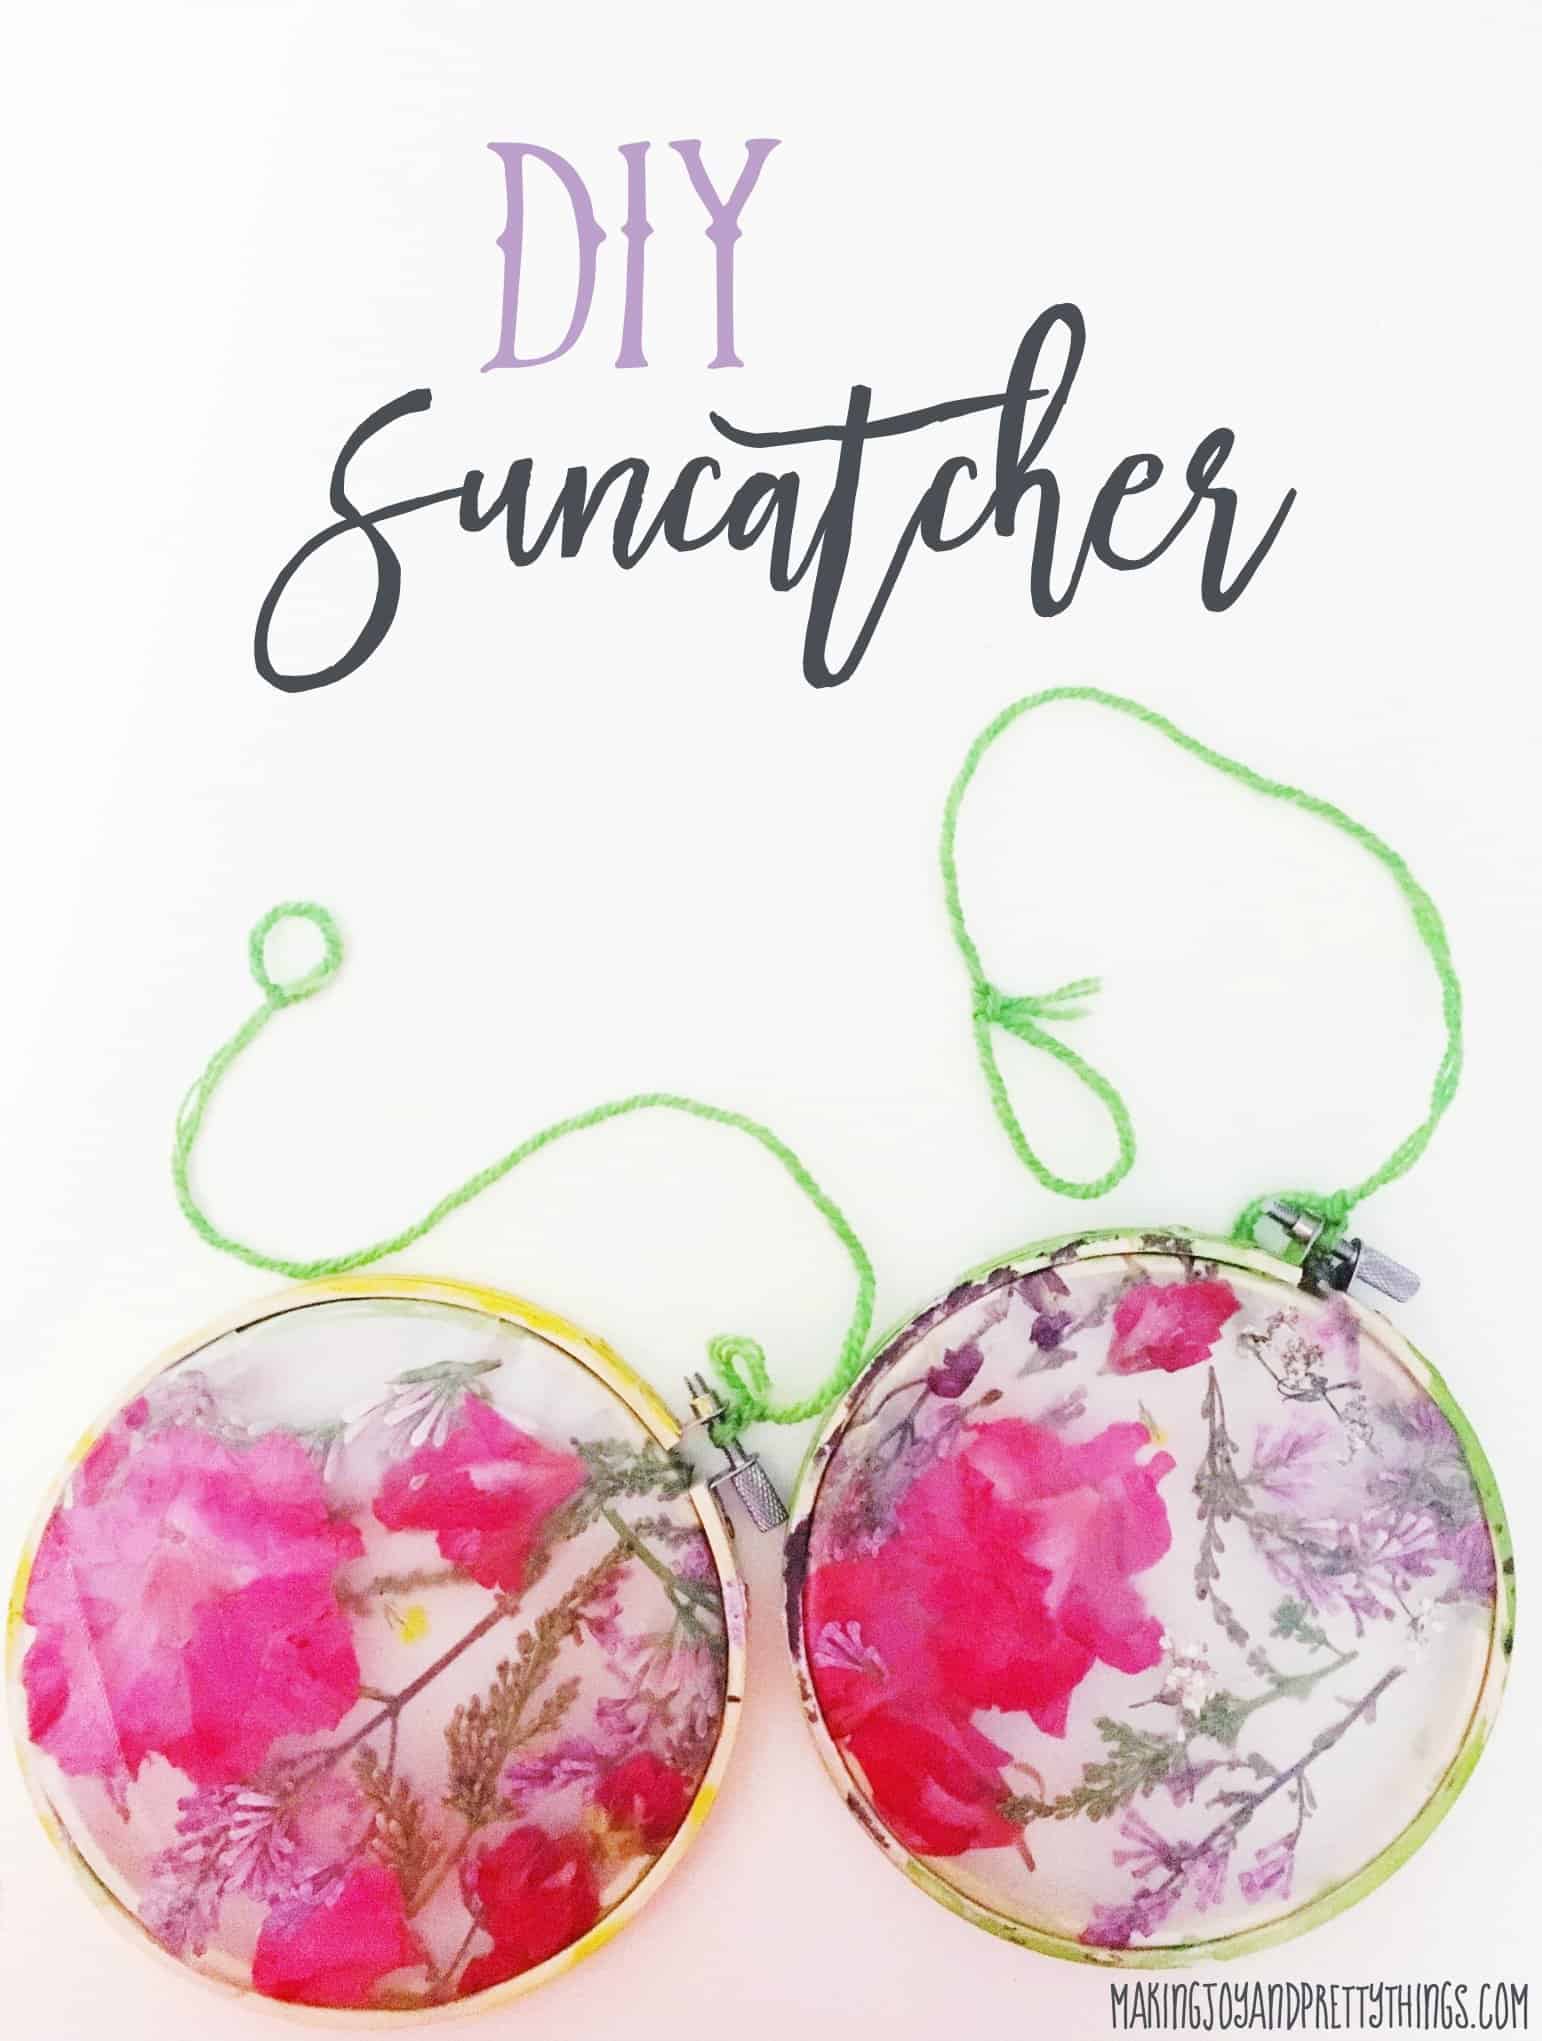 Two small pressed flower suncatchers made with pink and purple pressed dried flowers in craft hoops. Image text overlay reads 